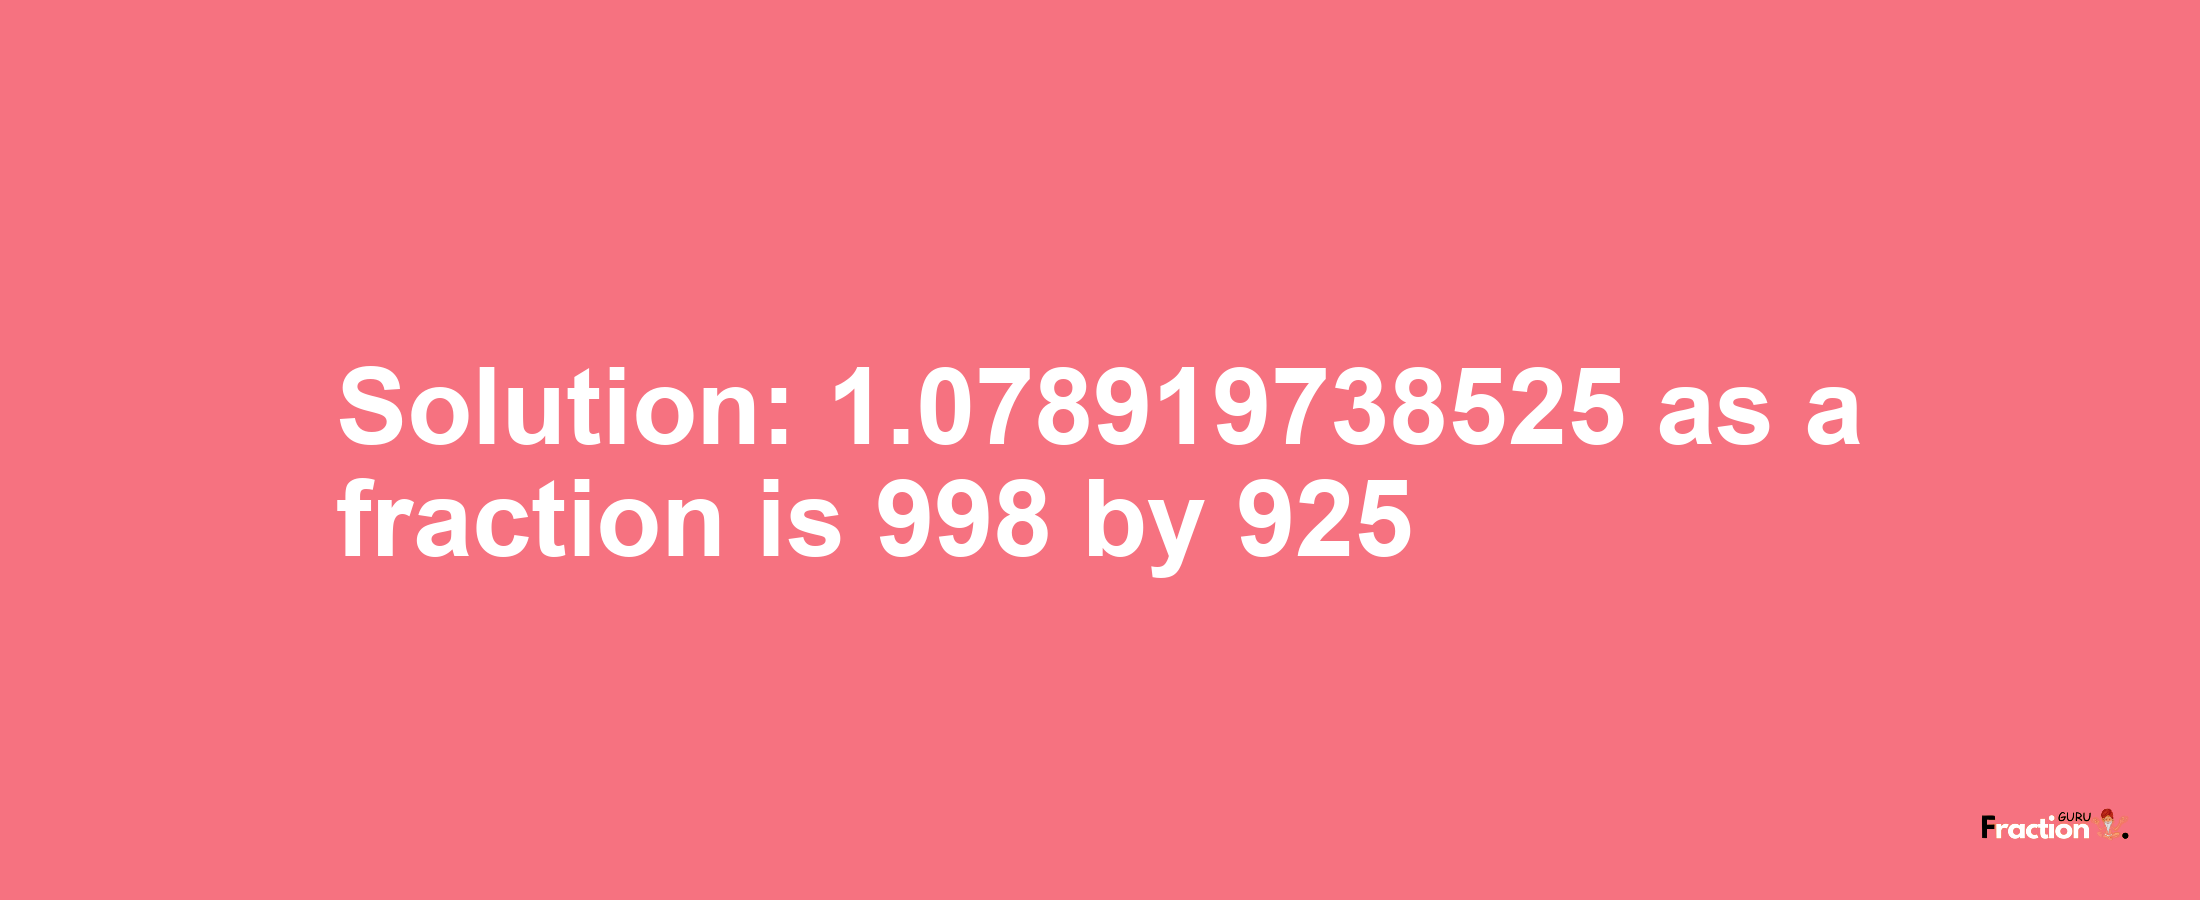 Solution:1.078919738525 as a fraction is 998/925